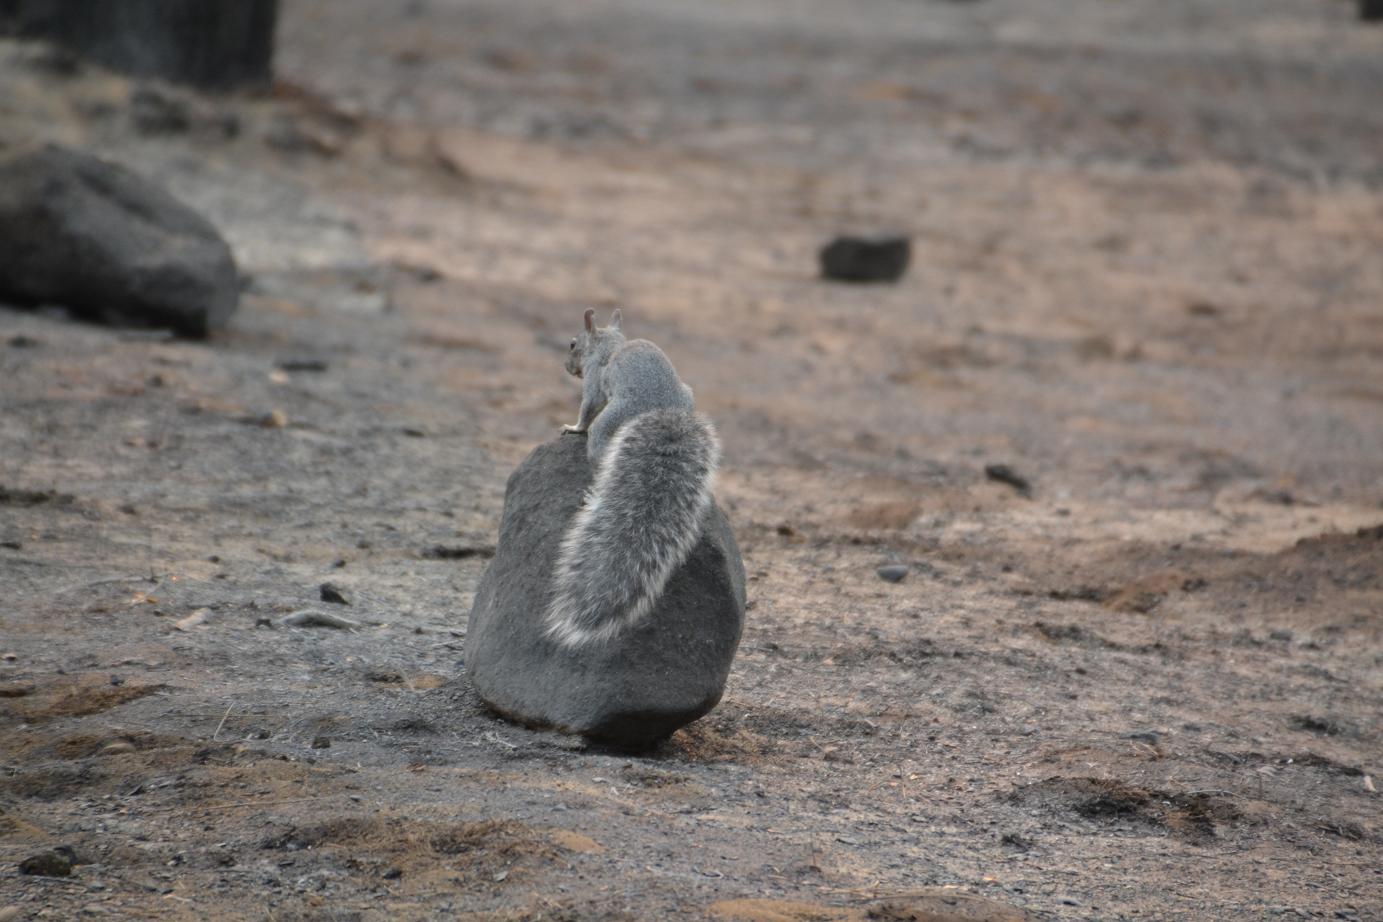 Squirrel at the Rim Fire - photo by Gina Clugston